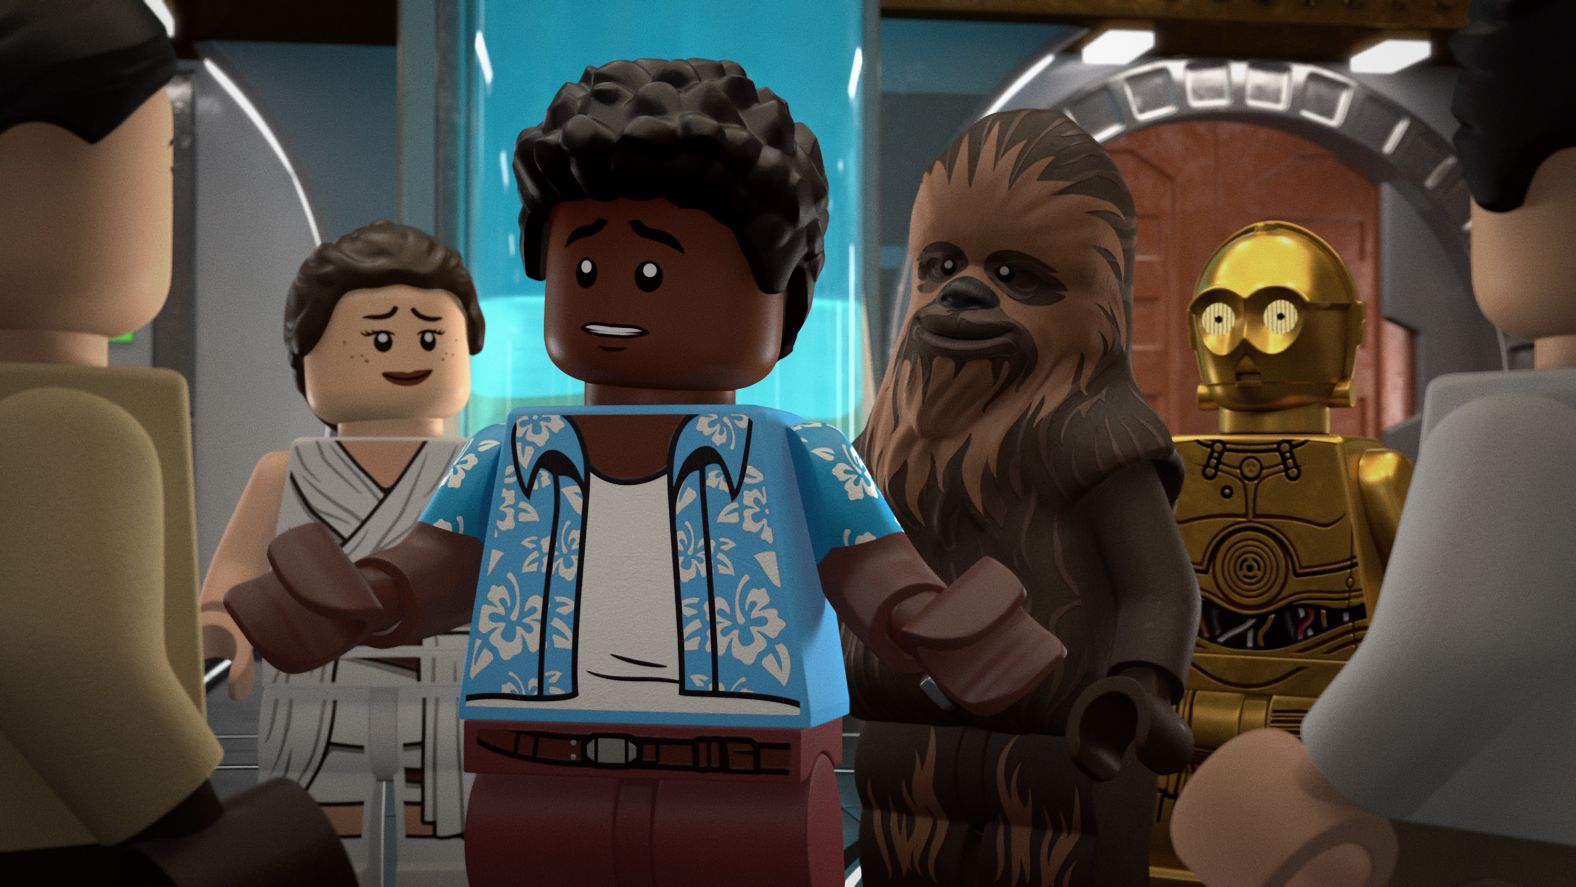 <strong>"LEGO Star Wars Summer Vacation"</strong>: Finn has arranged a surprise vacation for his friends aboard the Galactic Starcruiser, The Halcyon! But Finn's plan quickly goes awry when he's separated from the group.<strong> (Disney+) </strong>